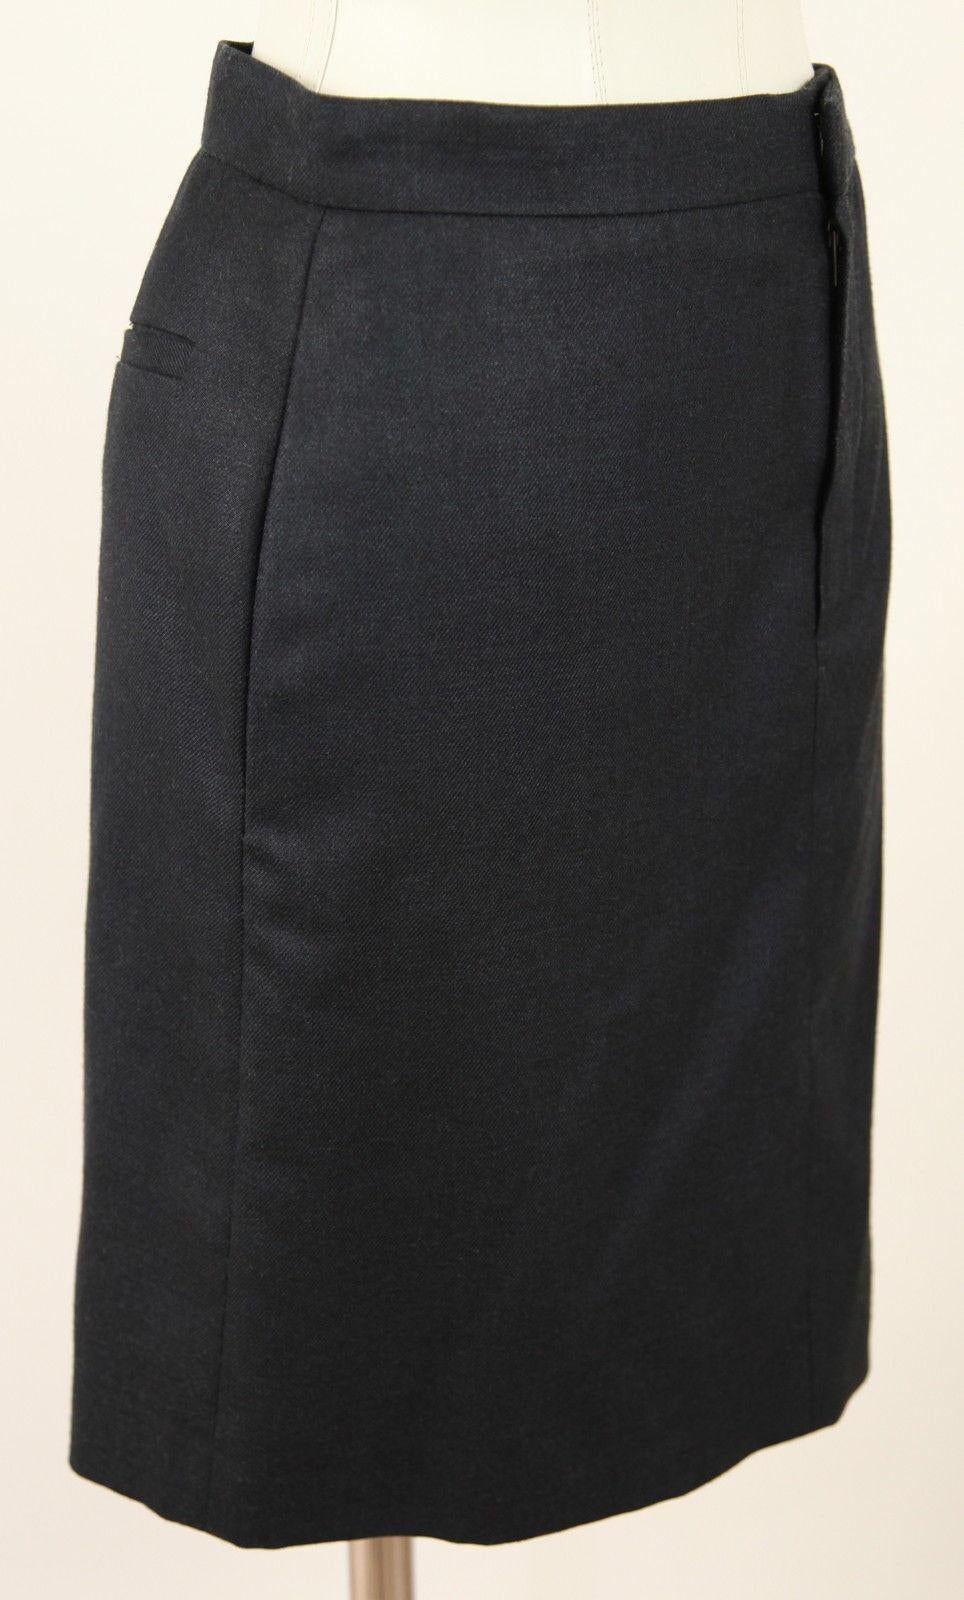 CHLOE 07A ICONIC BLACK STRAIGHT SKIRT

Color: Black

Fabric: Silk 52%, Wool 48%

Style: Straight above knee

Design:
- Flat front
- Front zipper and hook closure
- Covered side pockets
- Back slip pockets
- Fully lined

Size: 36
Measurements:
 -